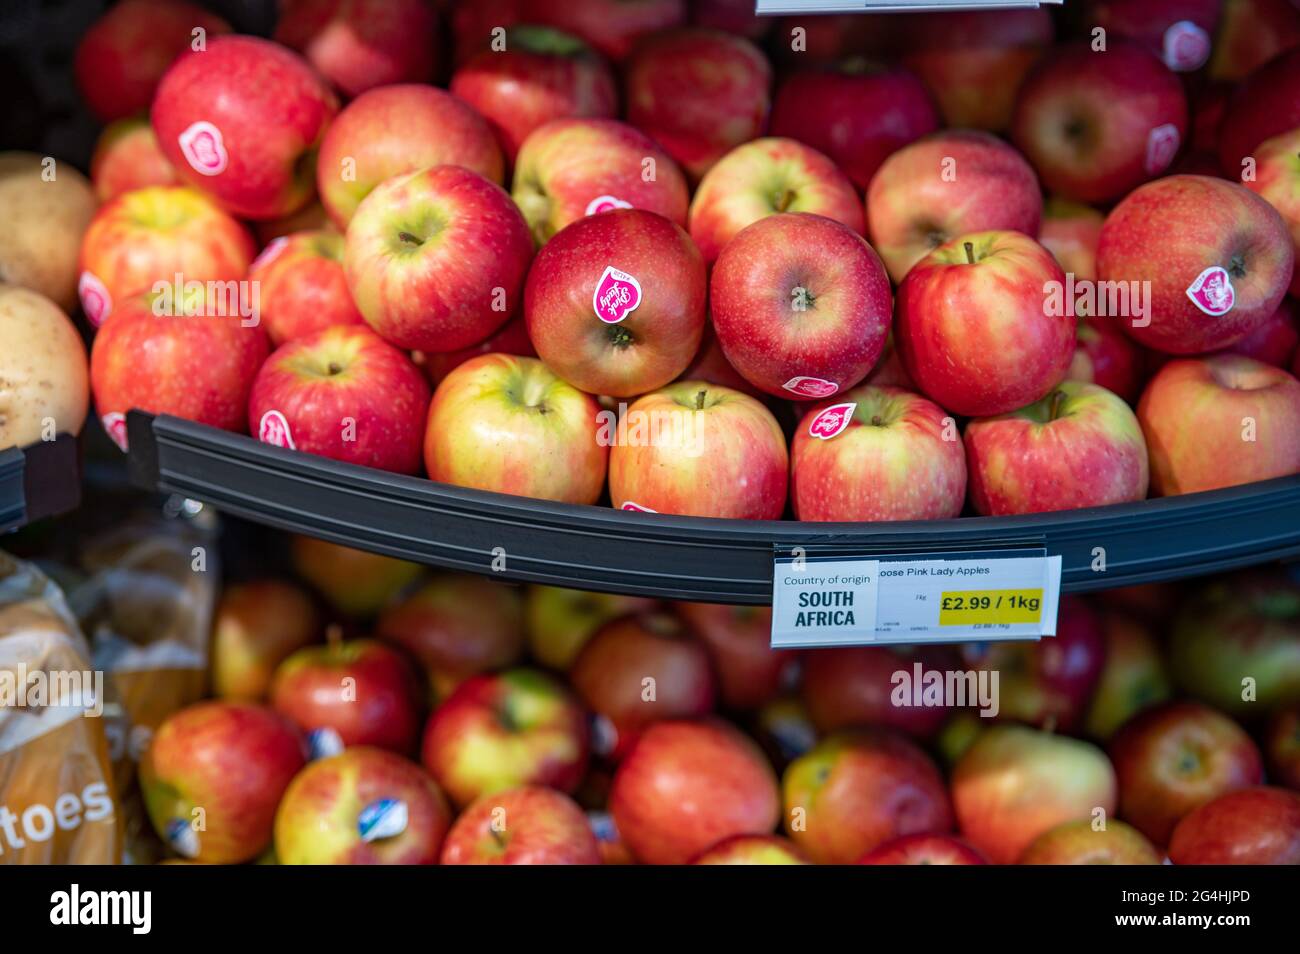 Pink lady apples on sale at a supermarket Stock Photo